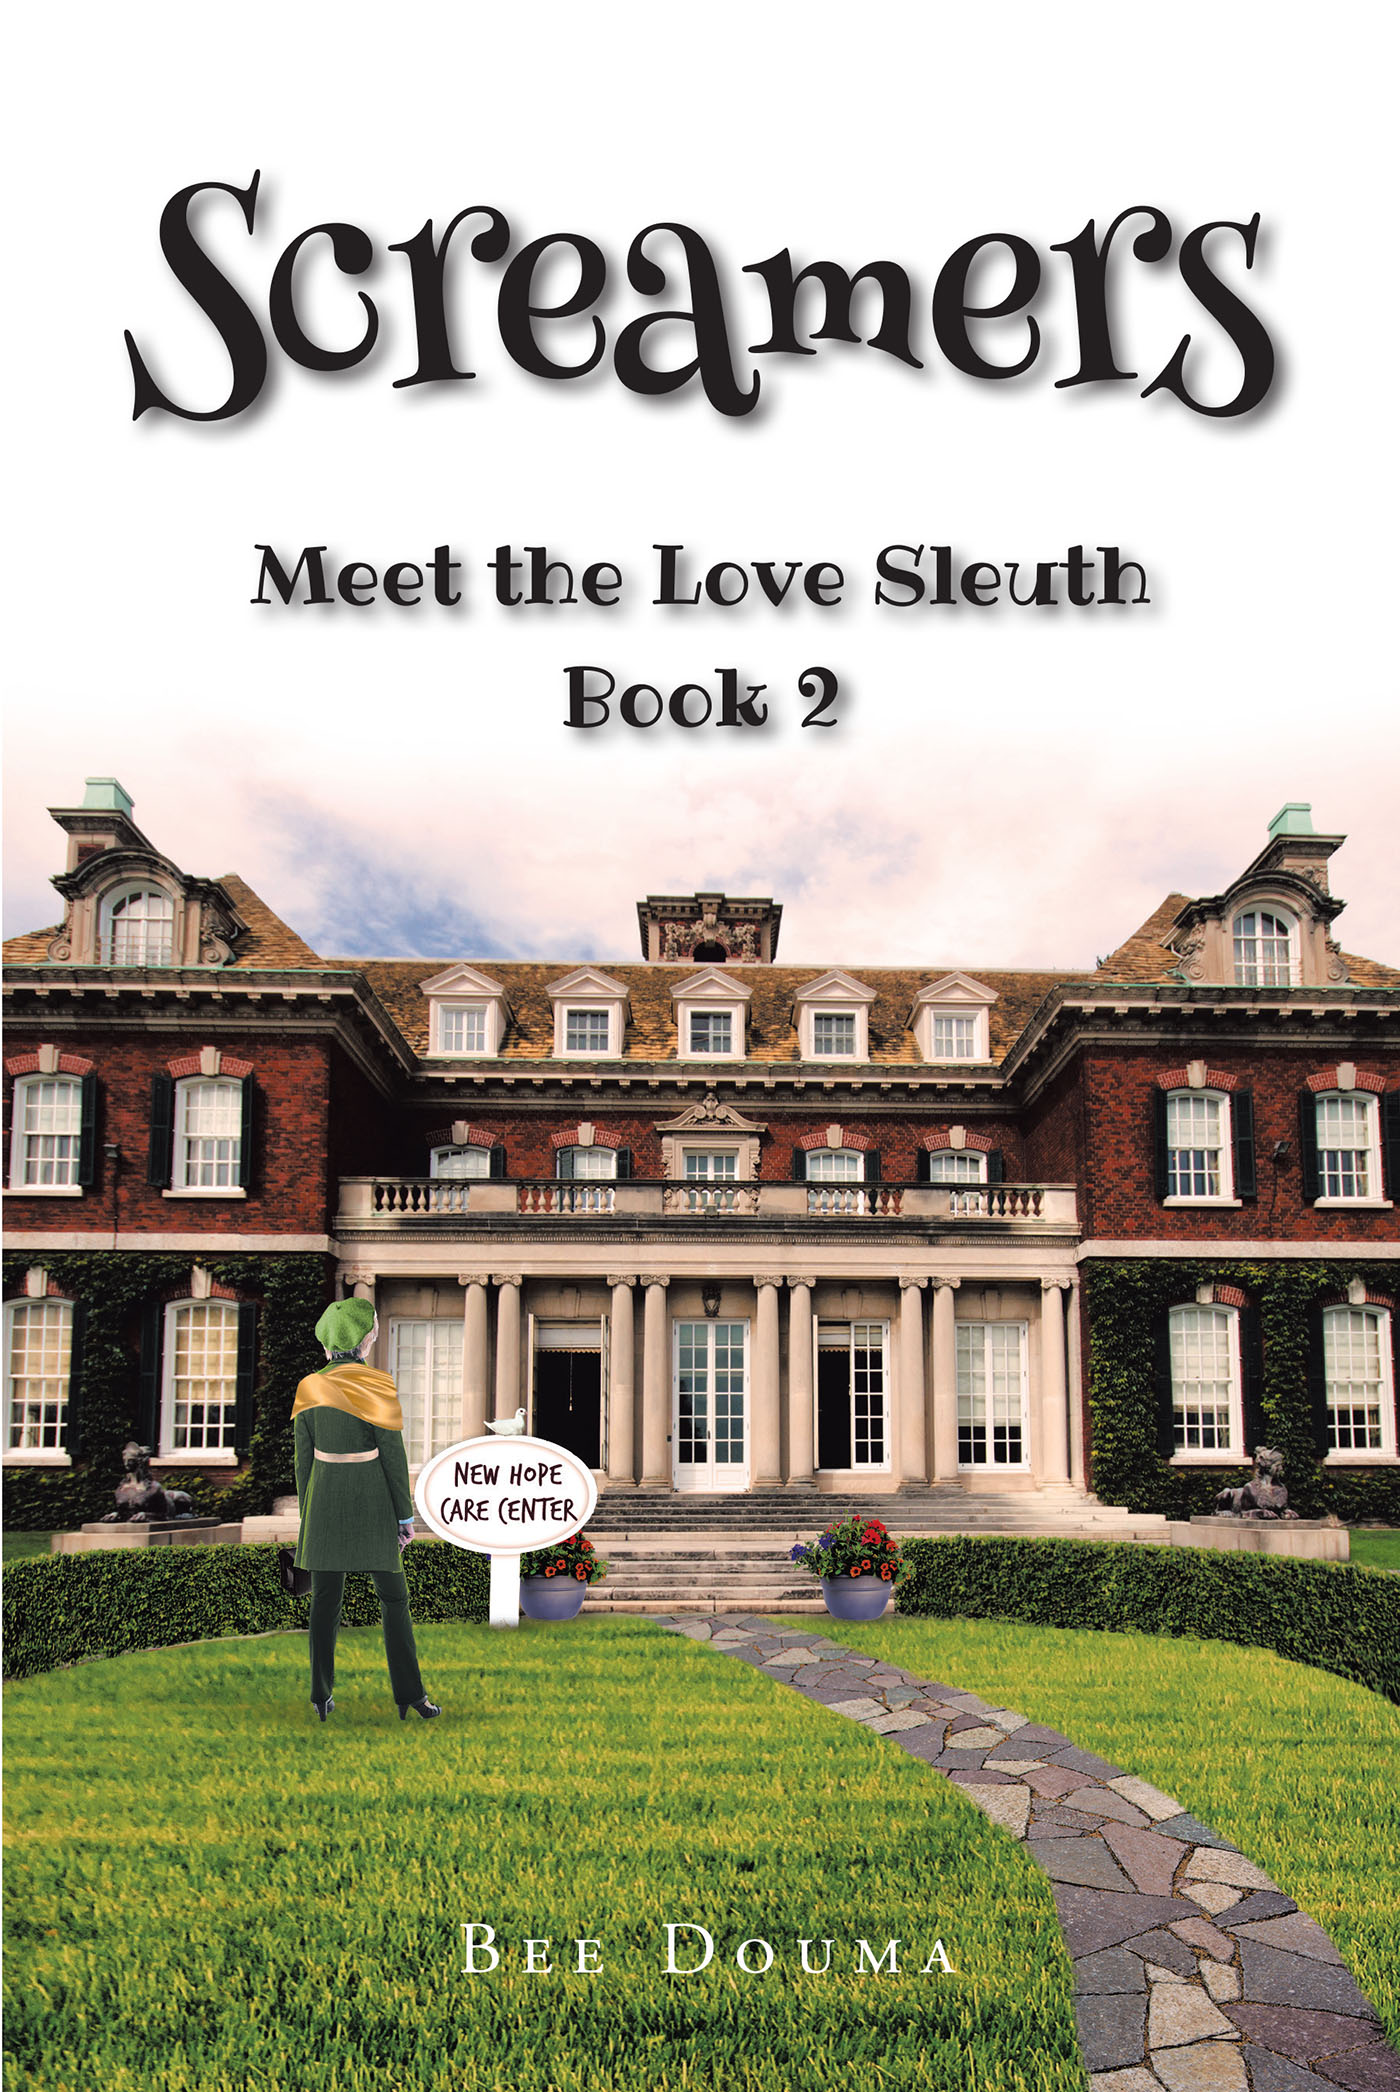 Bee Douma’s Newly Released "Screamers: Meet the Love Sleuth: Book 2" Continues a Compelling Tale of Unexpected Love and Challenges